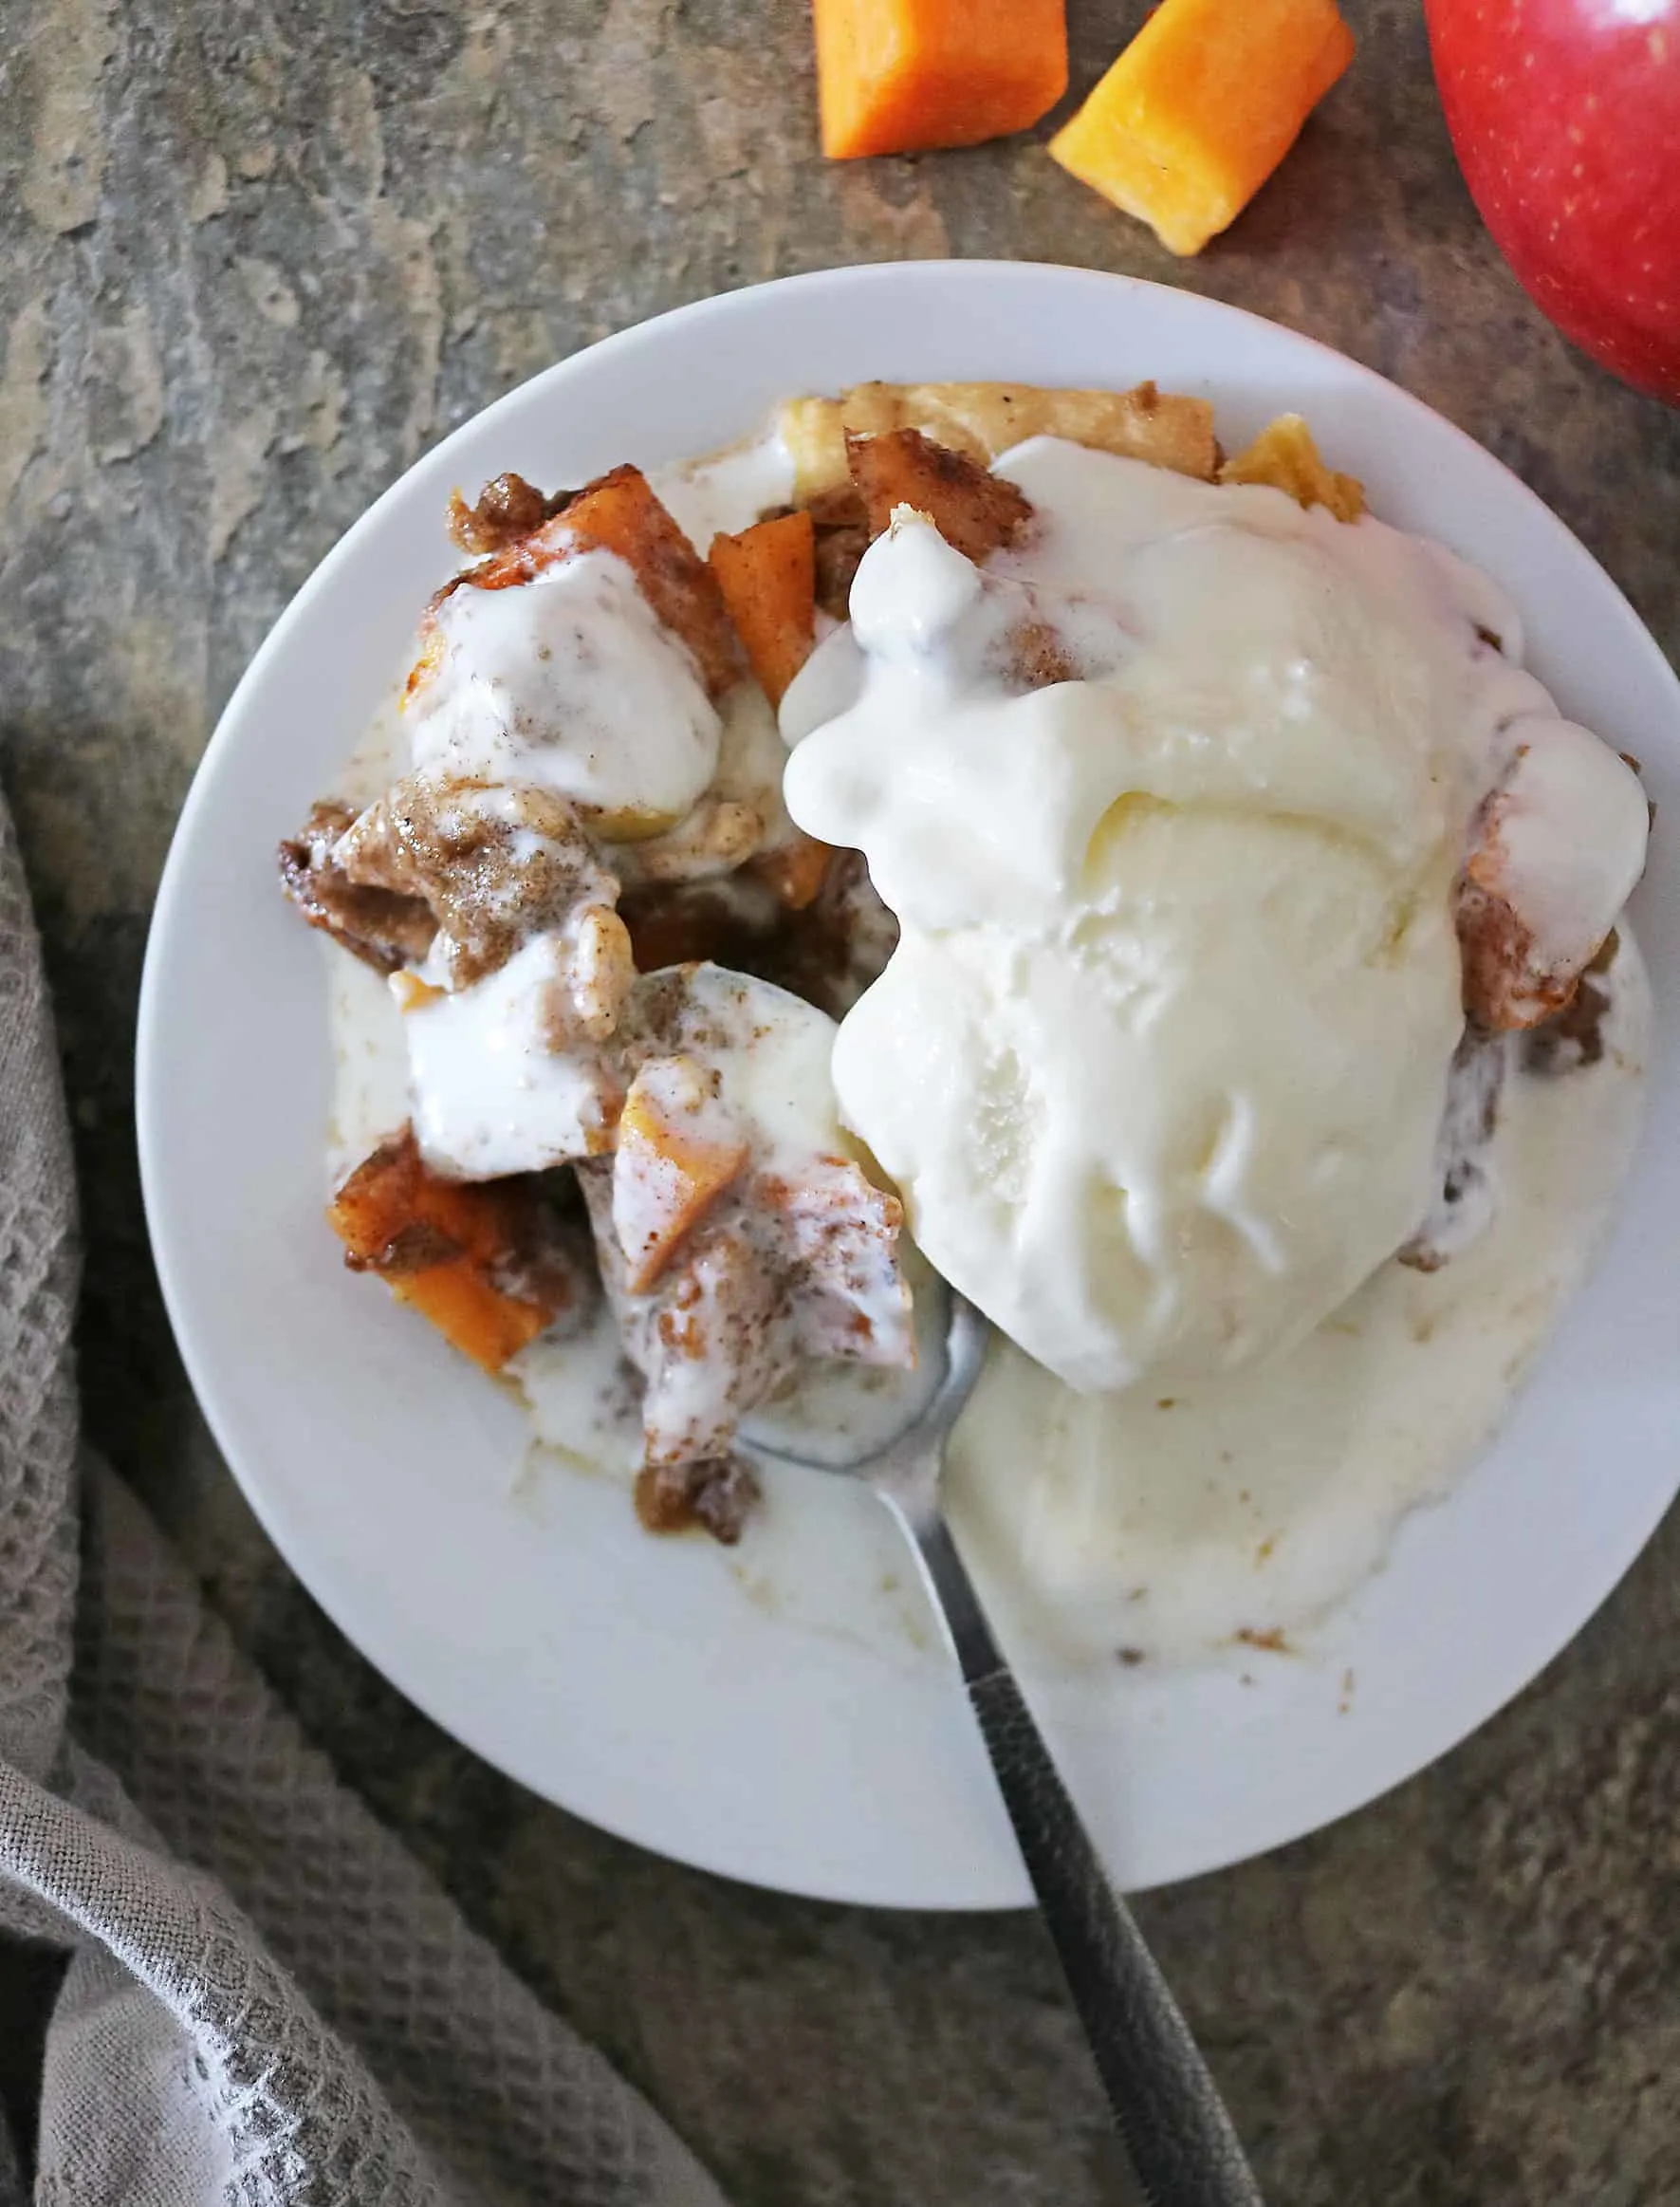 Delicious Apple Crumble Pie with butternut squash and Tillamook